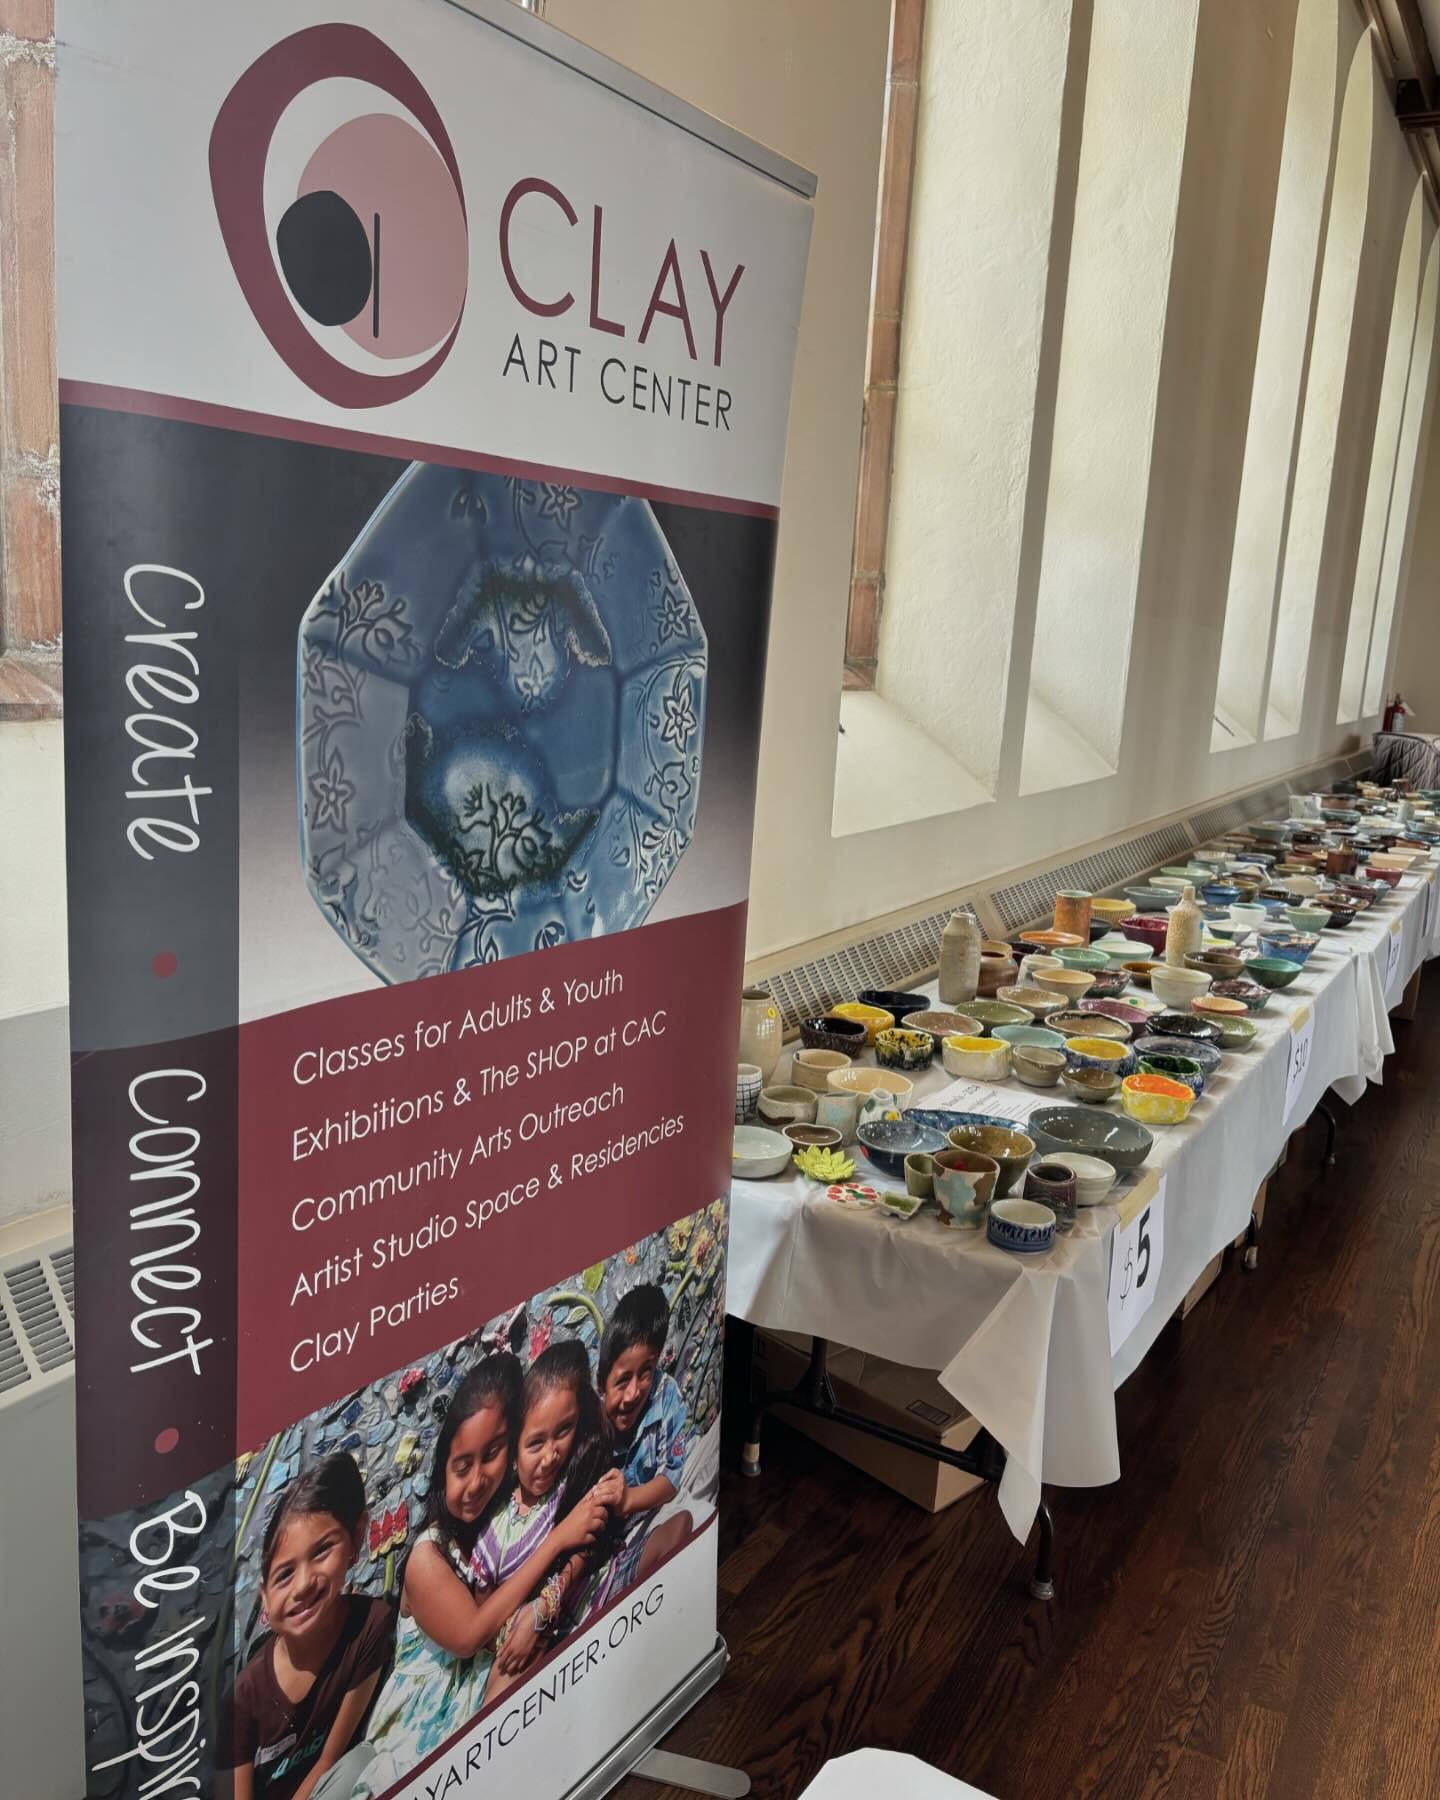 Thank you to everyone who has turned out so far this morning to support our Empty Bowls Fundraiser at Rye Presbyterian Church. We are here today until 12.30pm, so there is still time to come by to help fight food insecurity by purchasing a handmade b